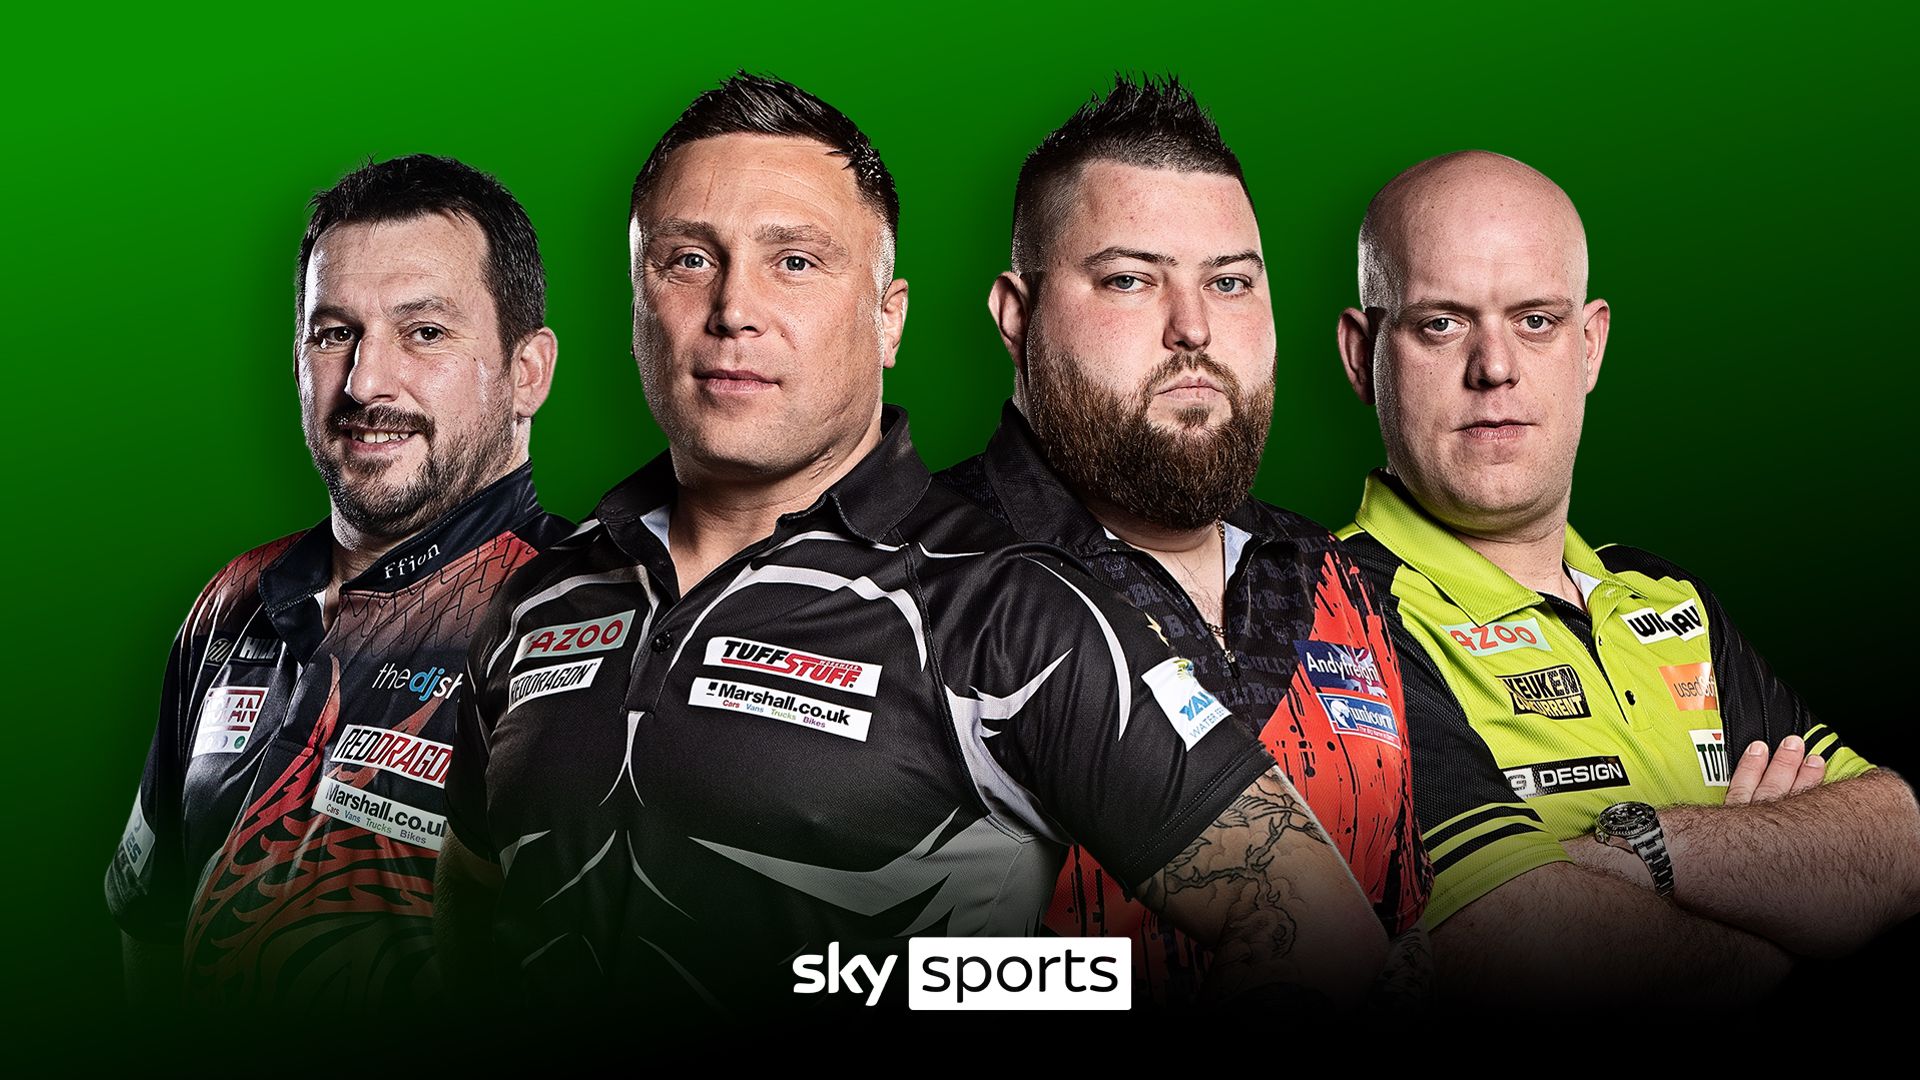 Mardle's Play-Offs Predictions: Price, Smith, MVG or Clayton?